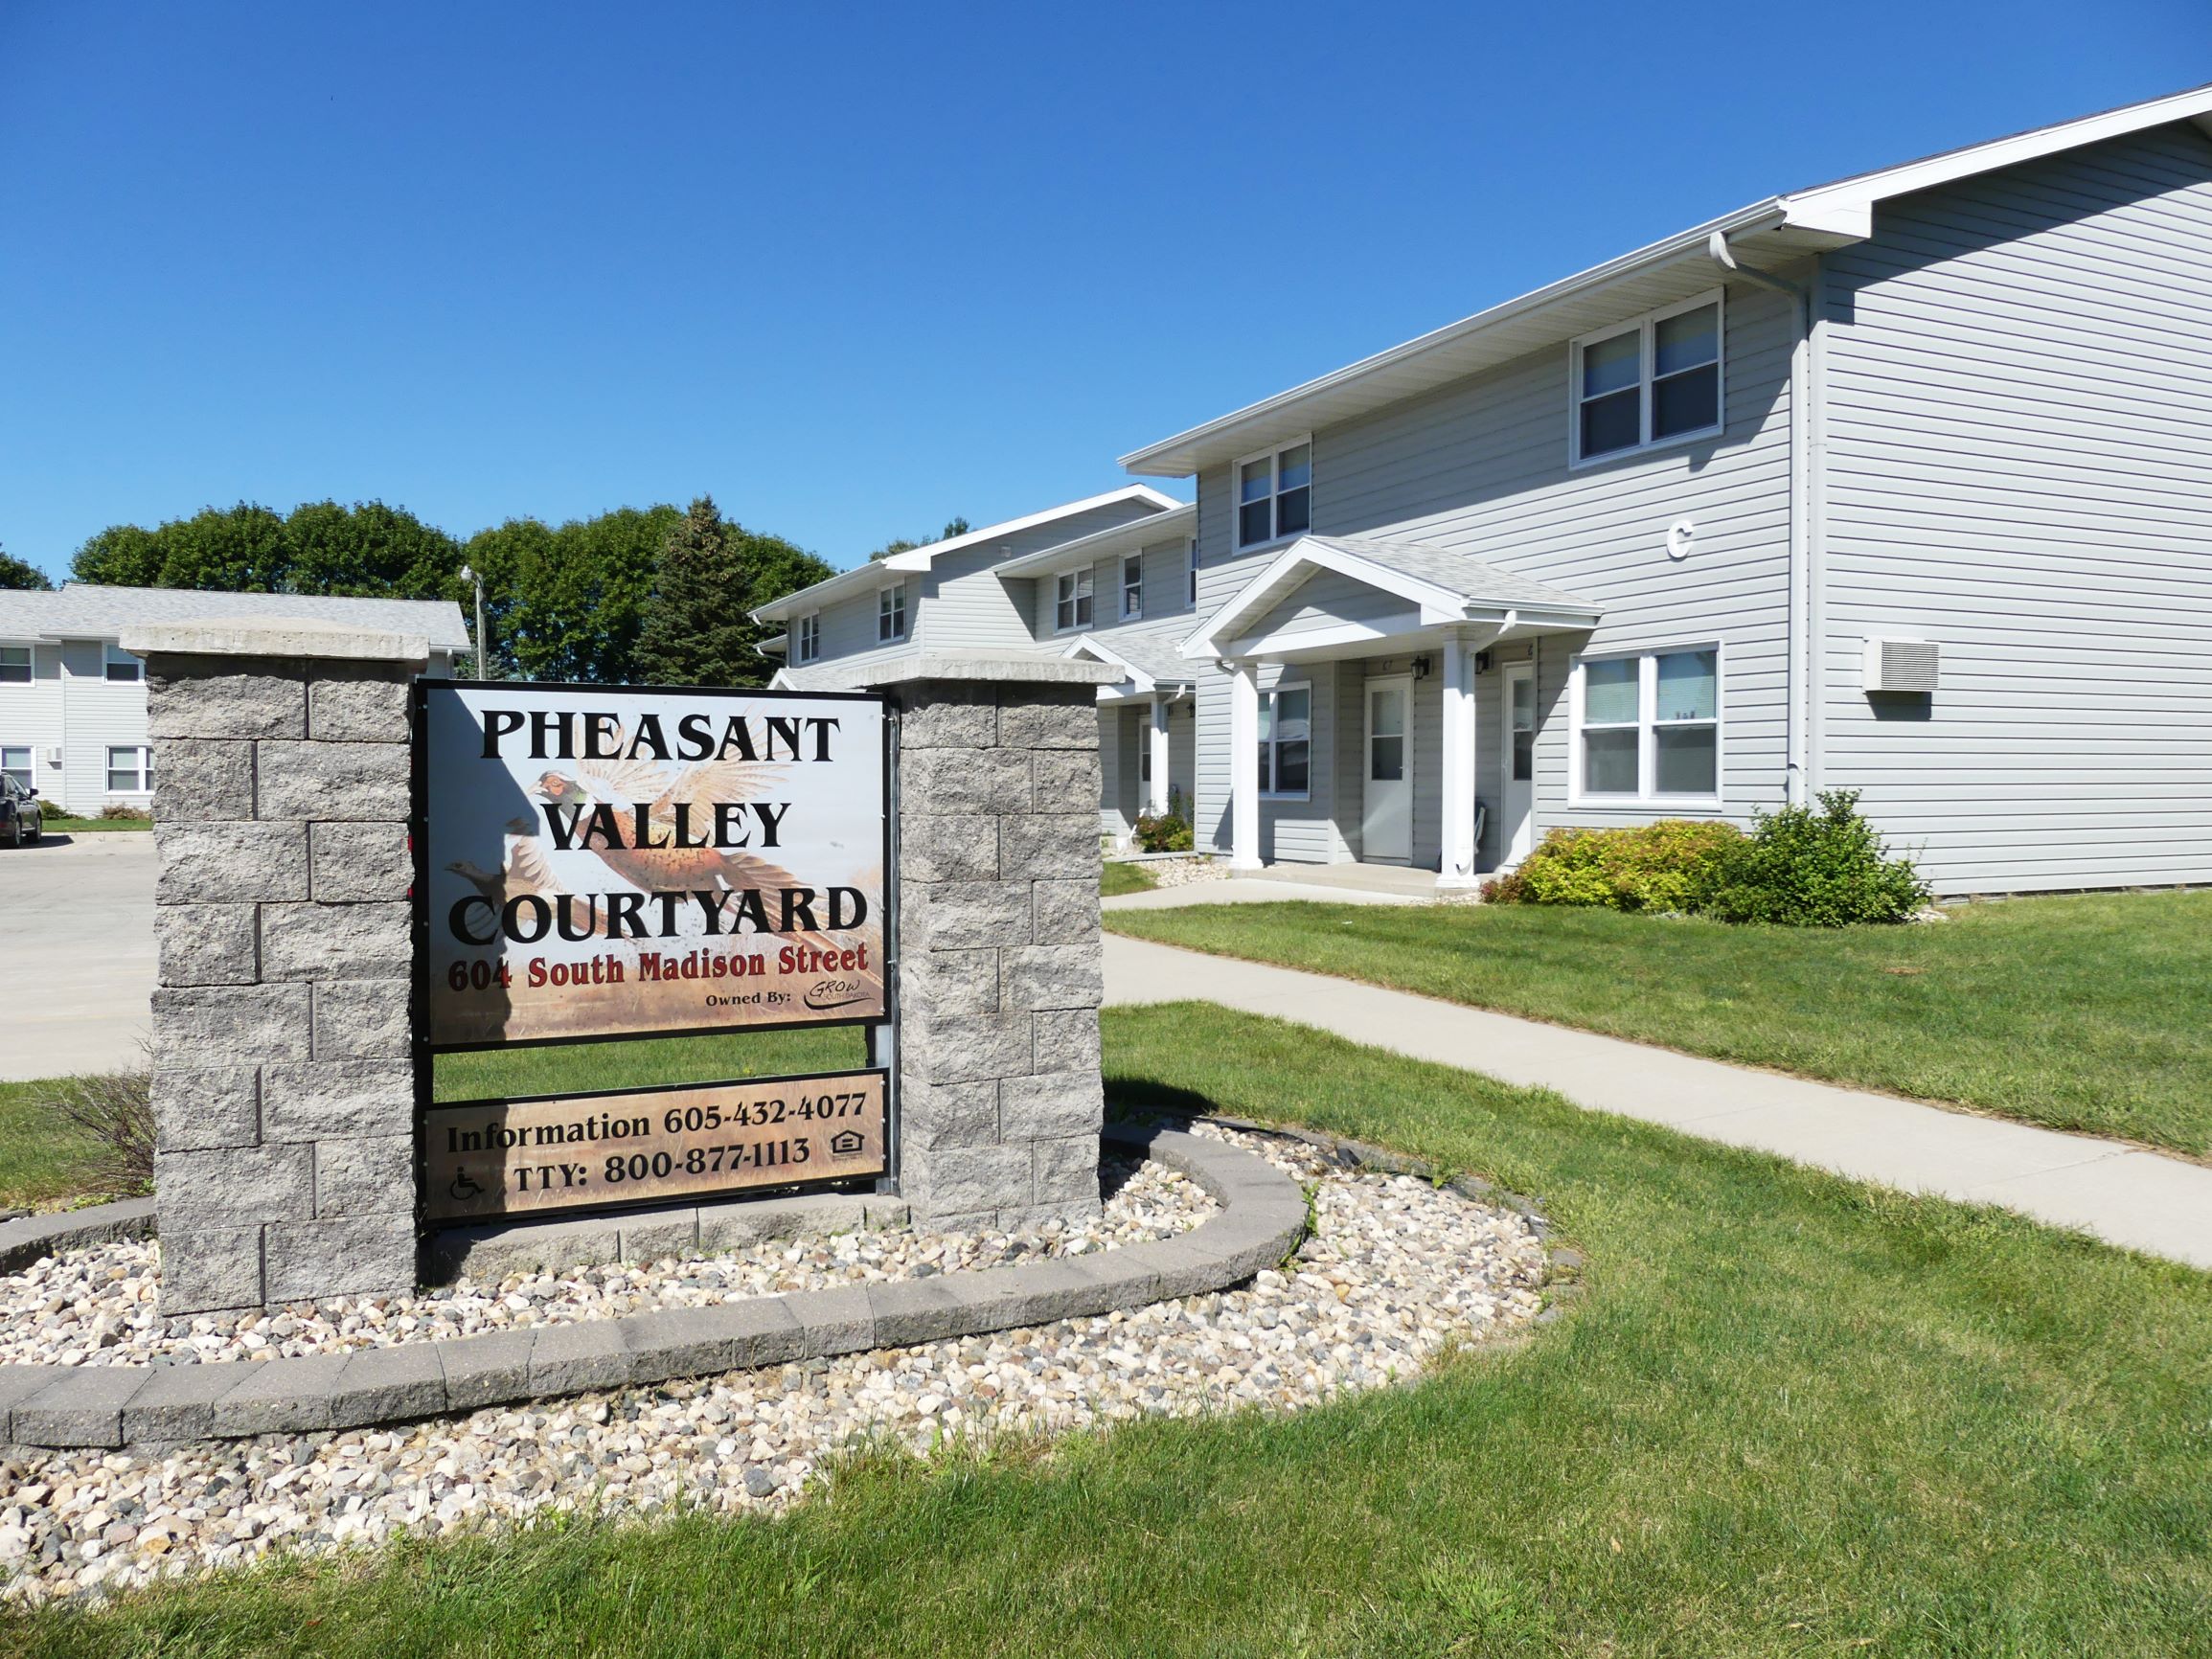 Pheasant Valley Courtyard Townhomes in Milbank SD Mills PropertyMills Property pic